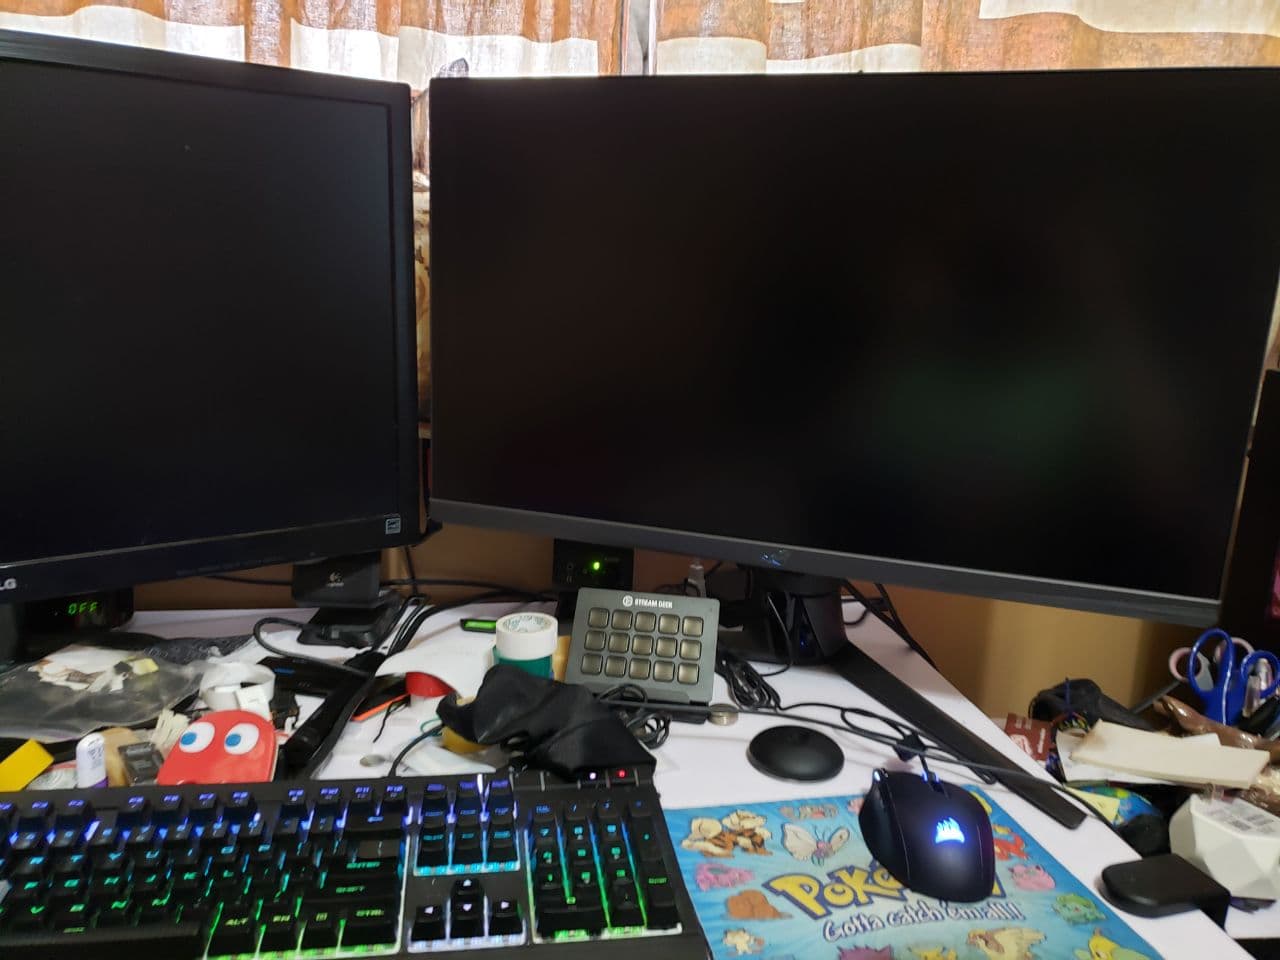 New Monitor Arrival